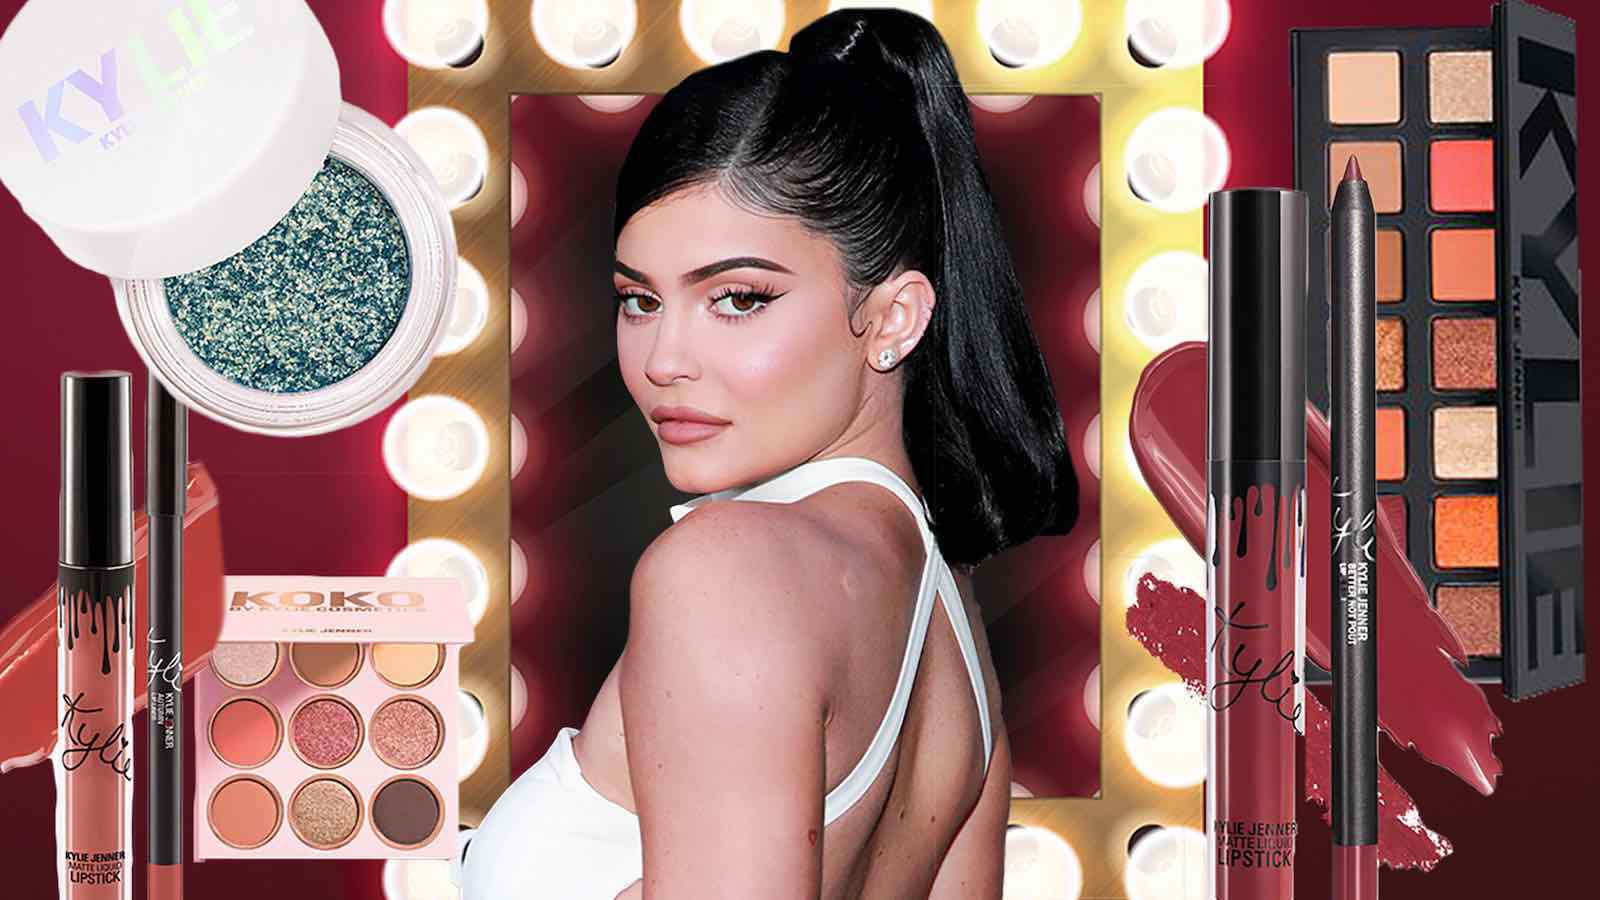 Was Kylie Jenner's net worth pure bluster? Real numbers say yes ...